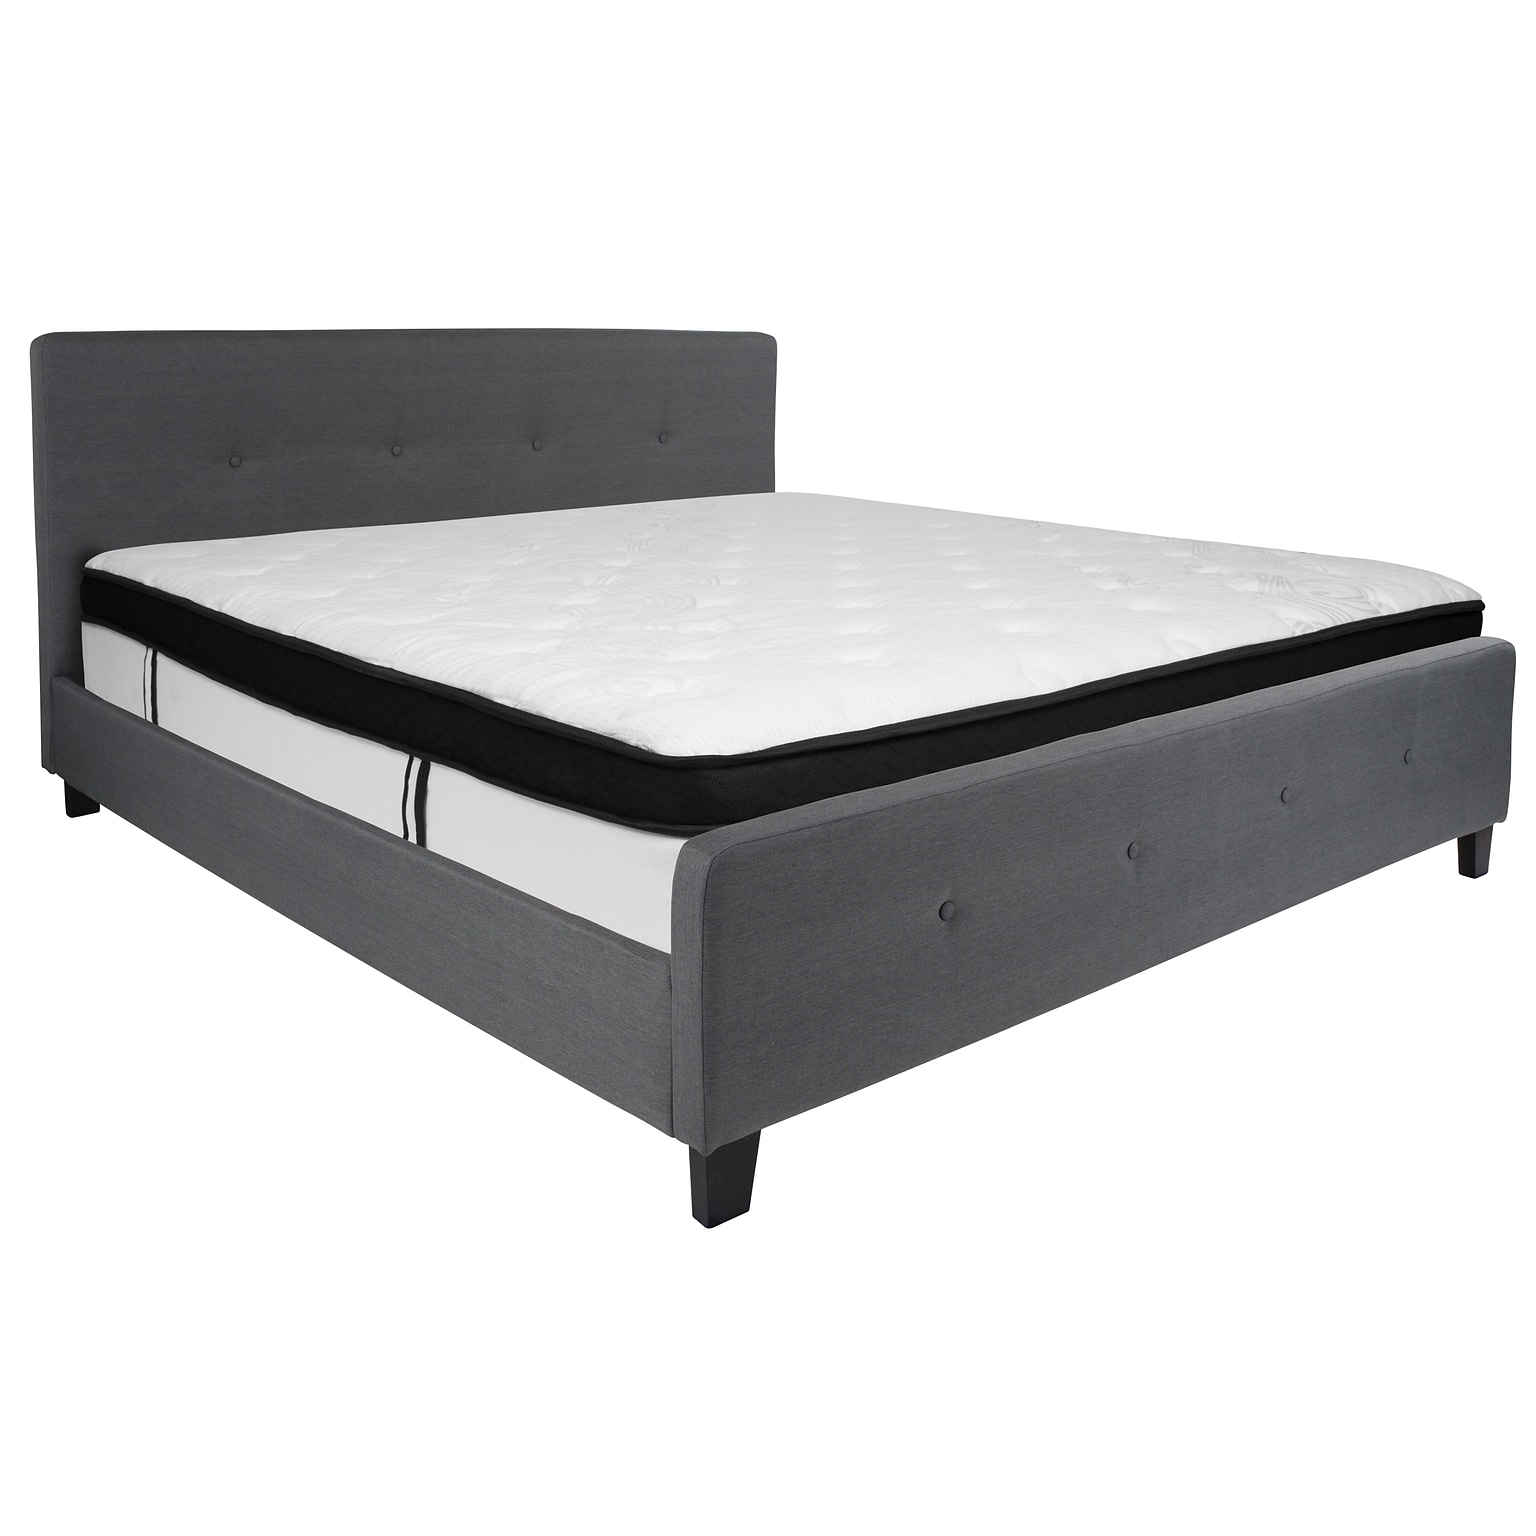 Flash Furniture Tribeca Tufted Upholstered Platform Bed in Dark Gray Fabric with Memory Foam Mattress, King (HGBMF32)